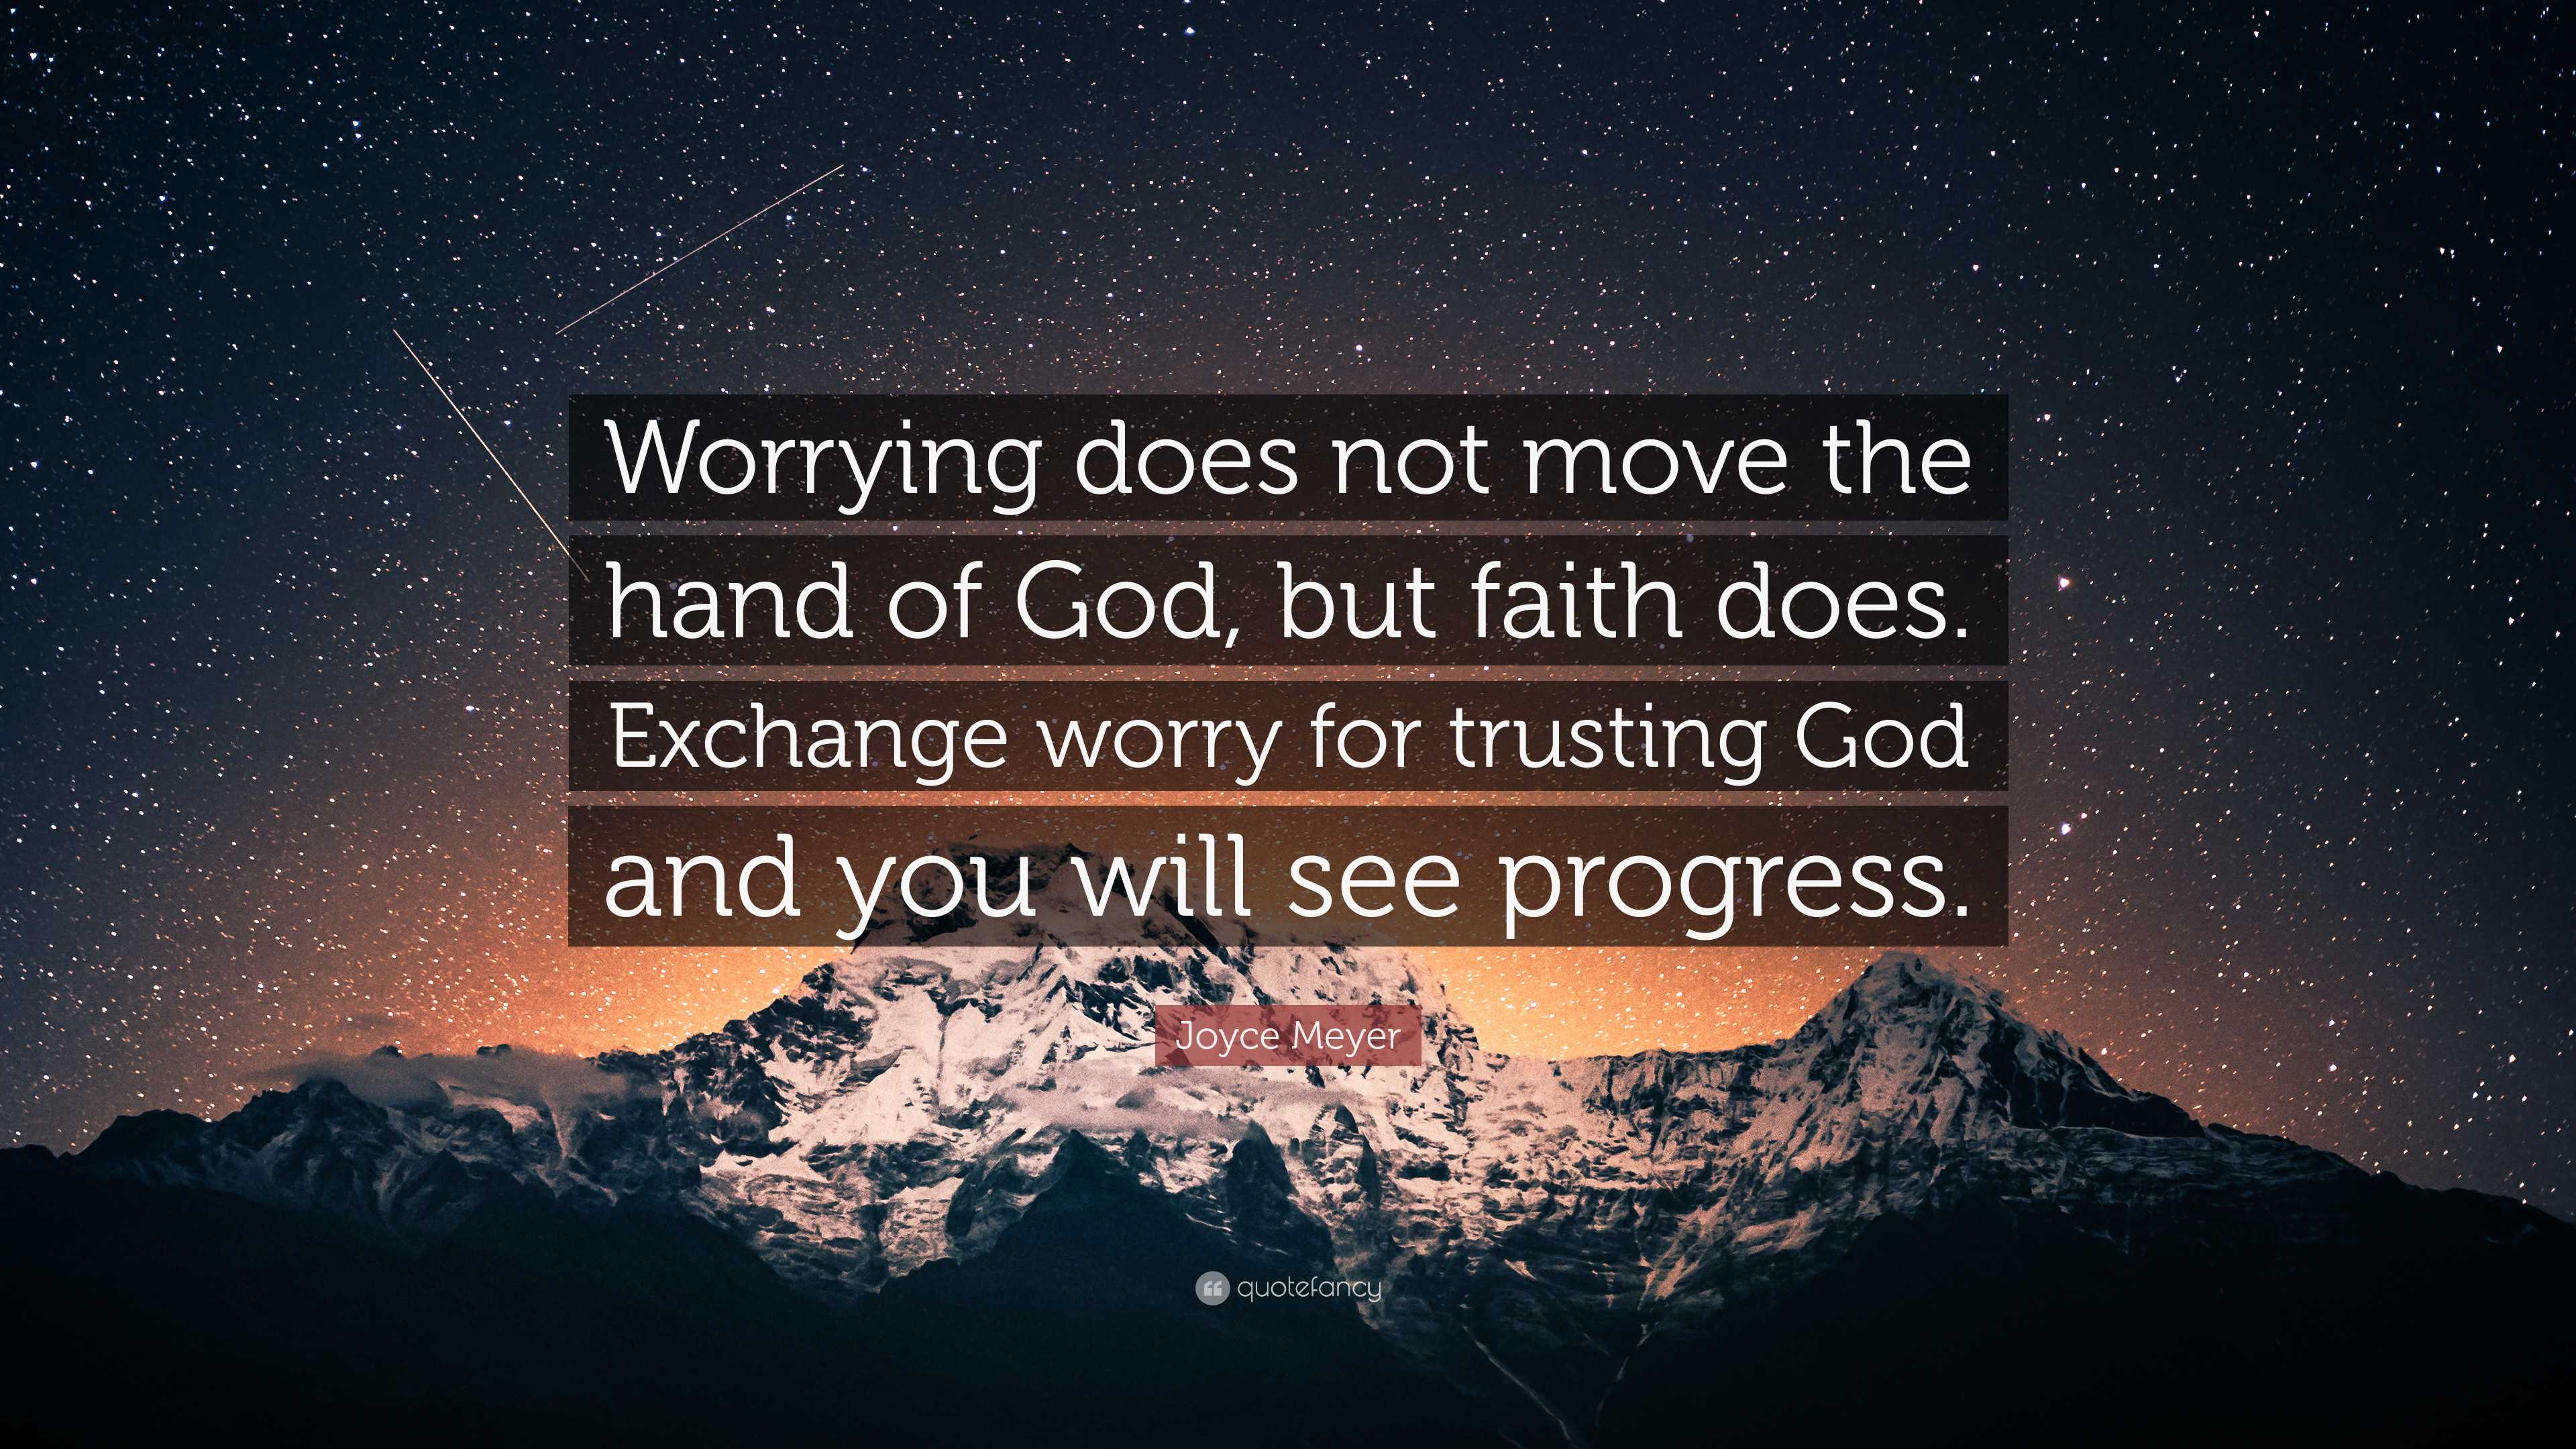 Don't Worry - God Is in Control, Joyce Meyer